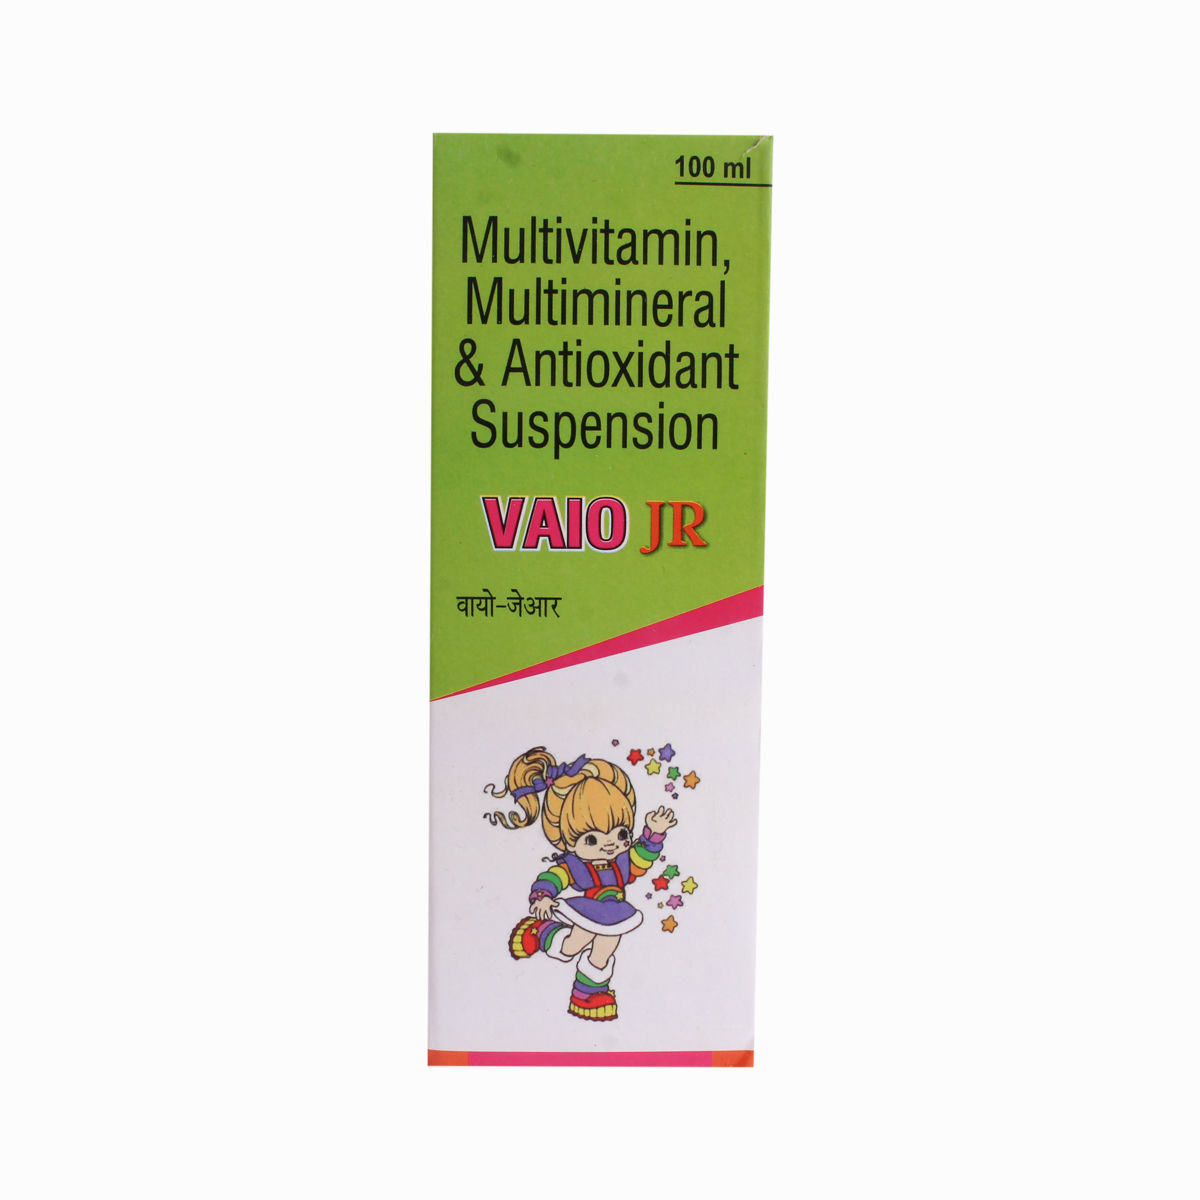 Vaio Jr Syrup 100 ml, Pack of 1 